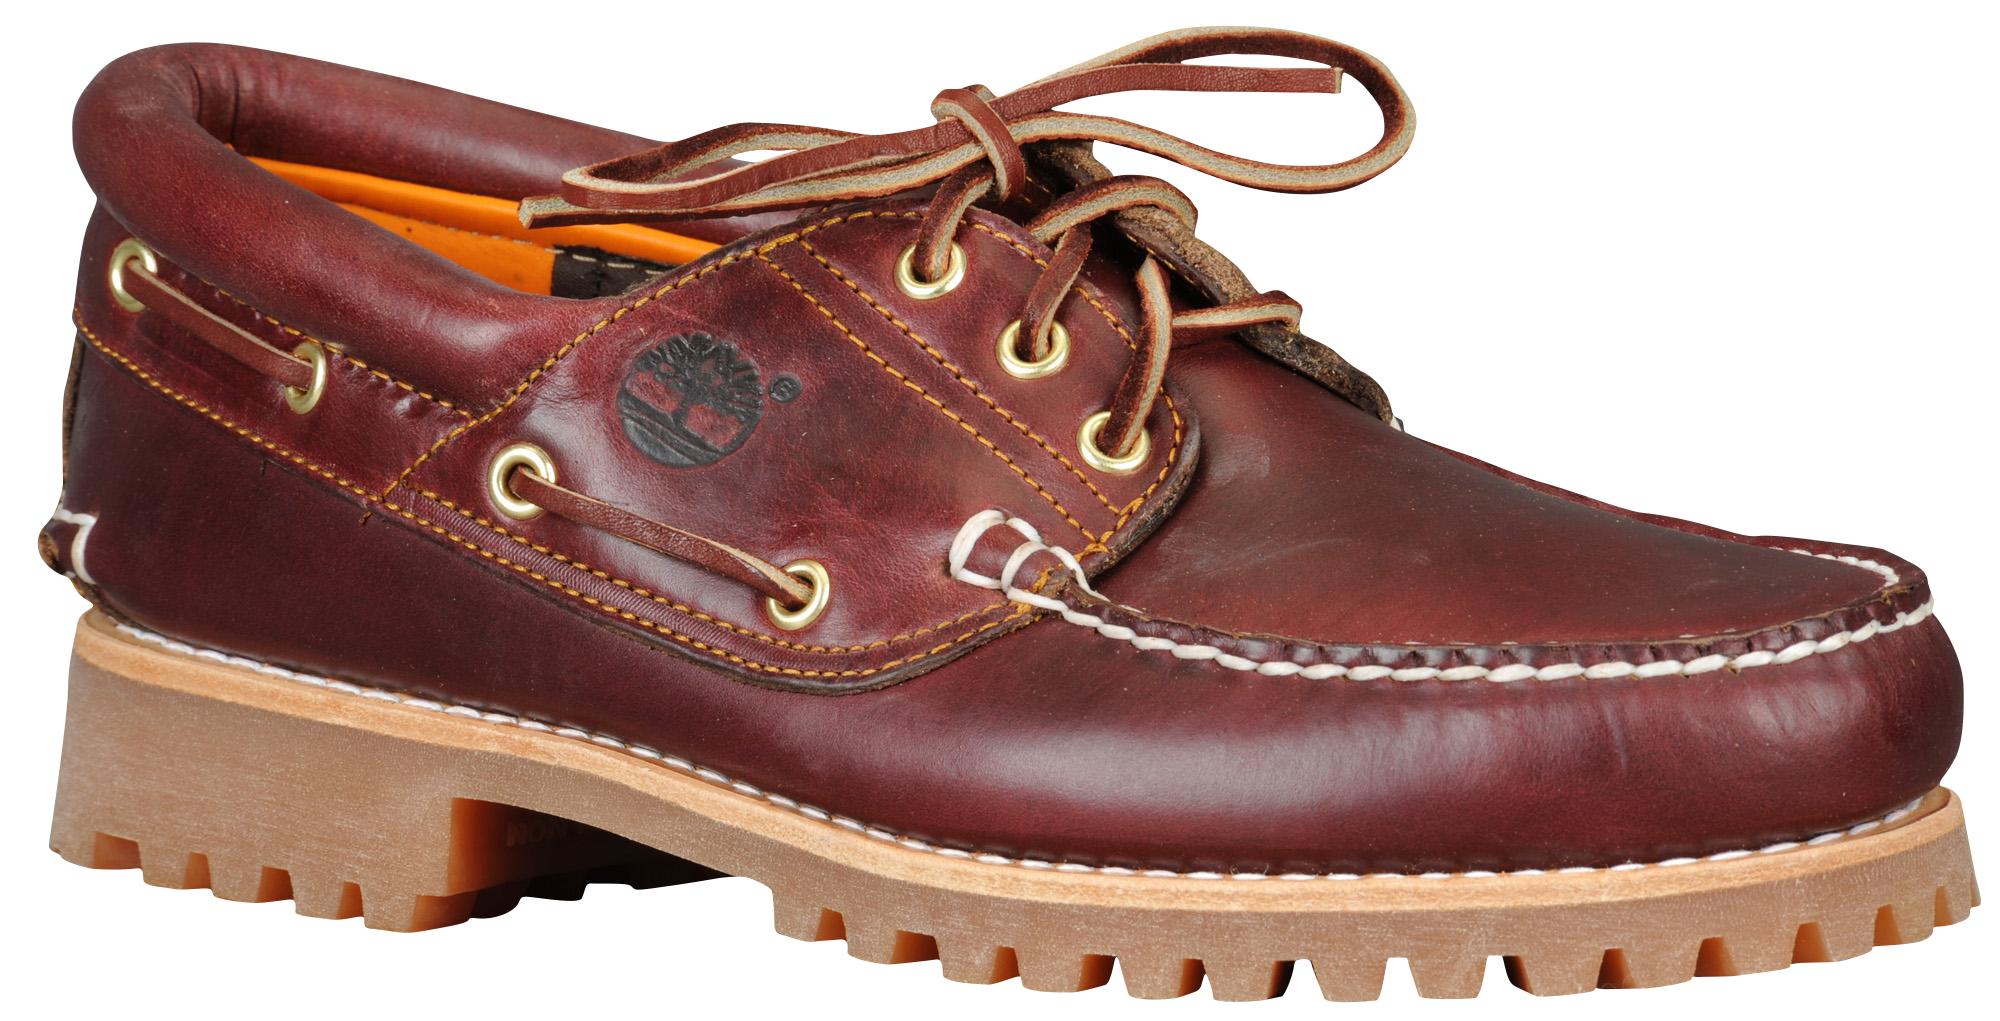 Timberland Leather 3 Eye Boat Shoes in Burgundy/Maroon (Purple 